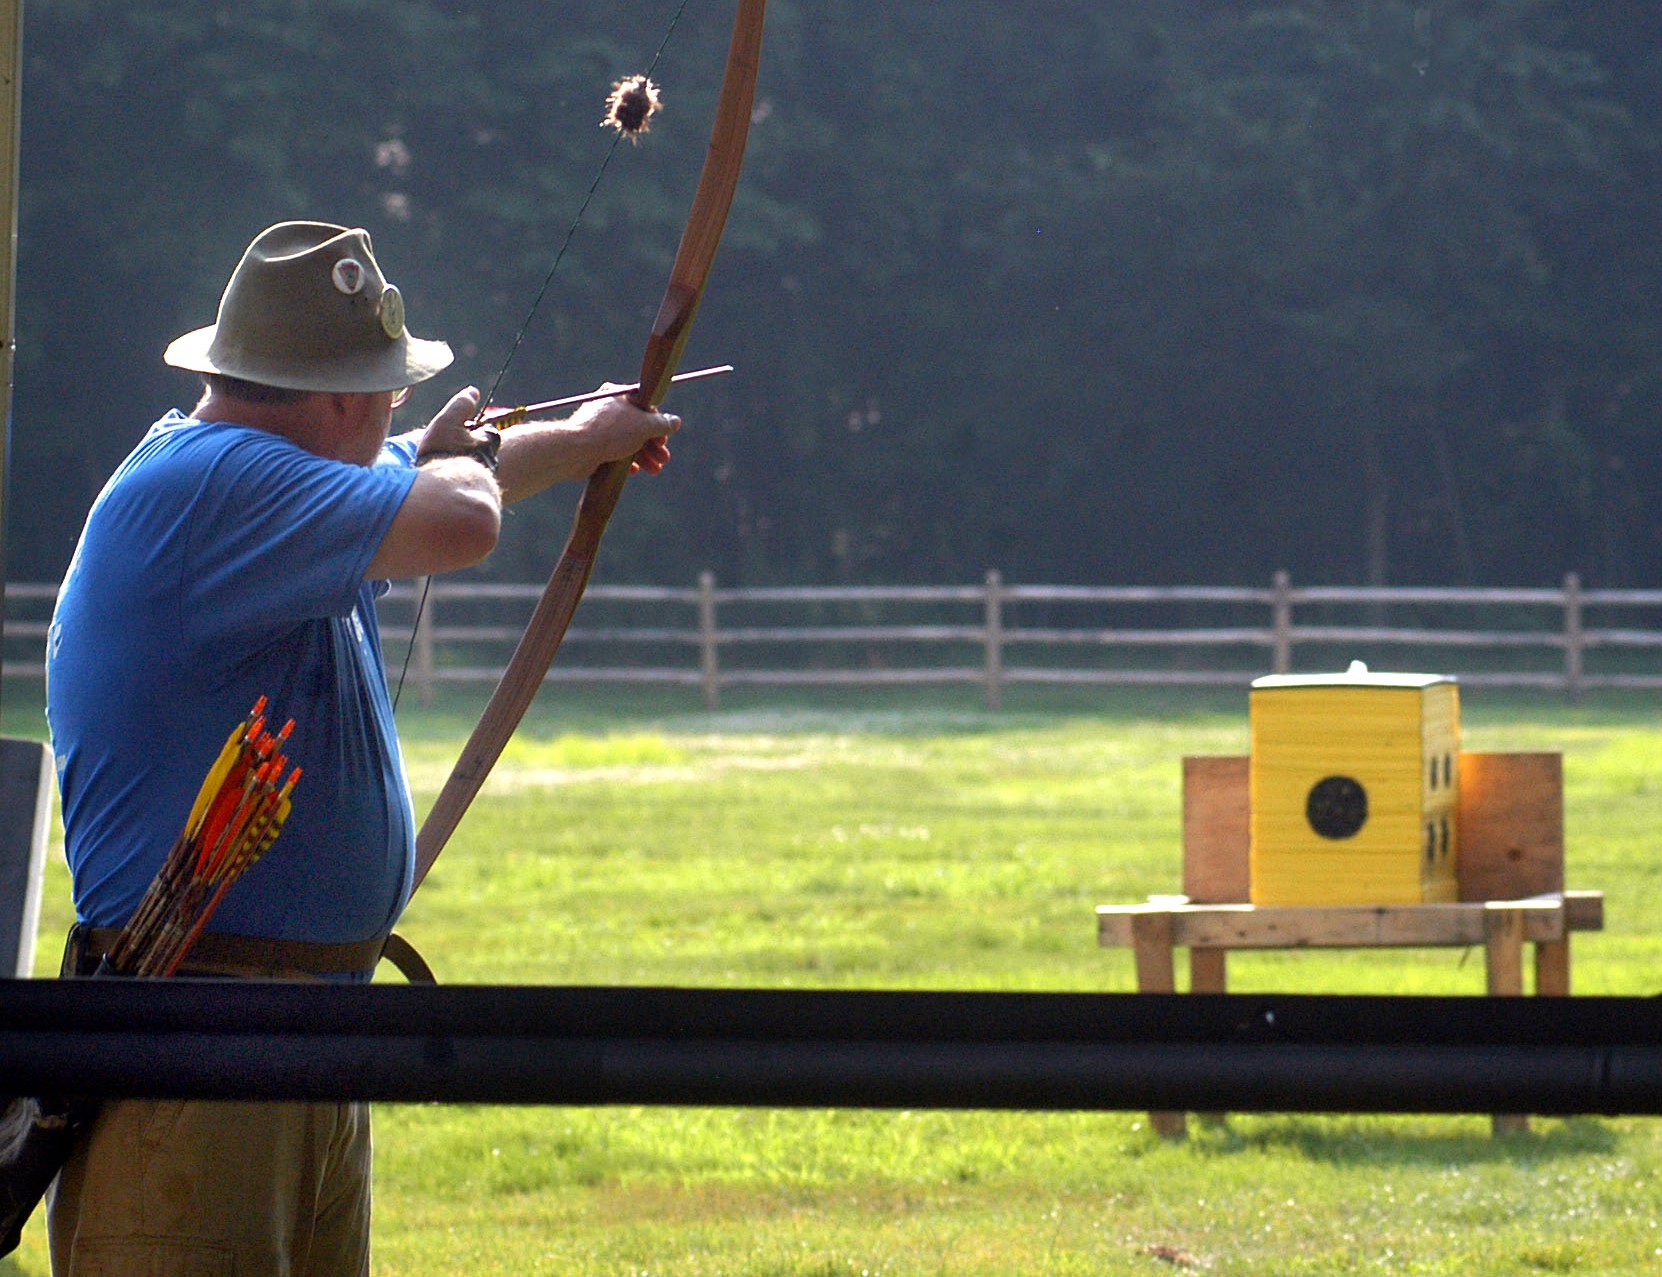 archer aiming at a target